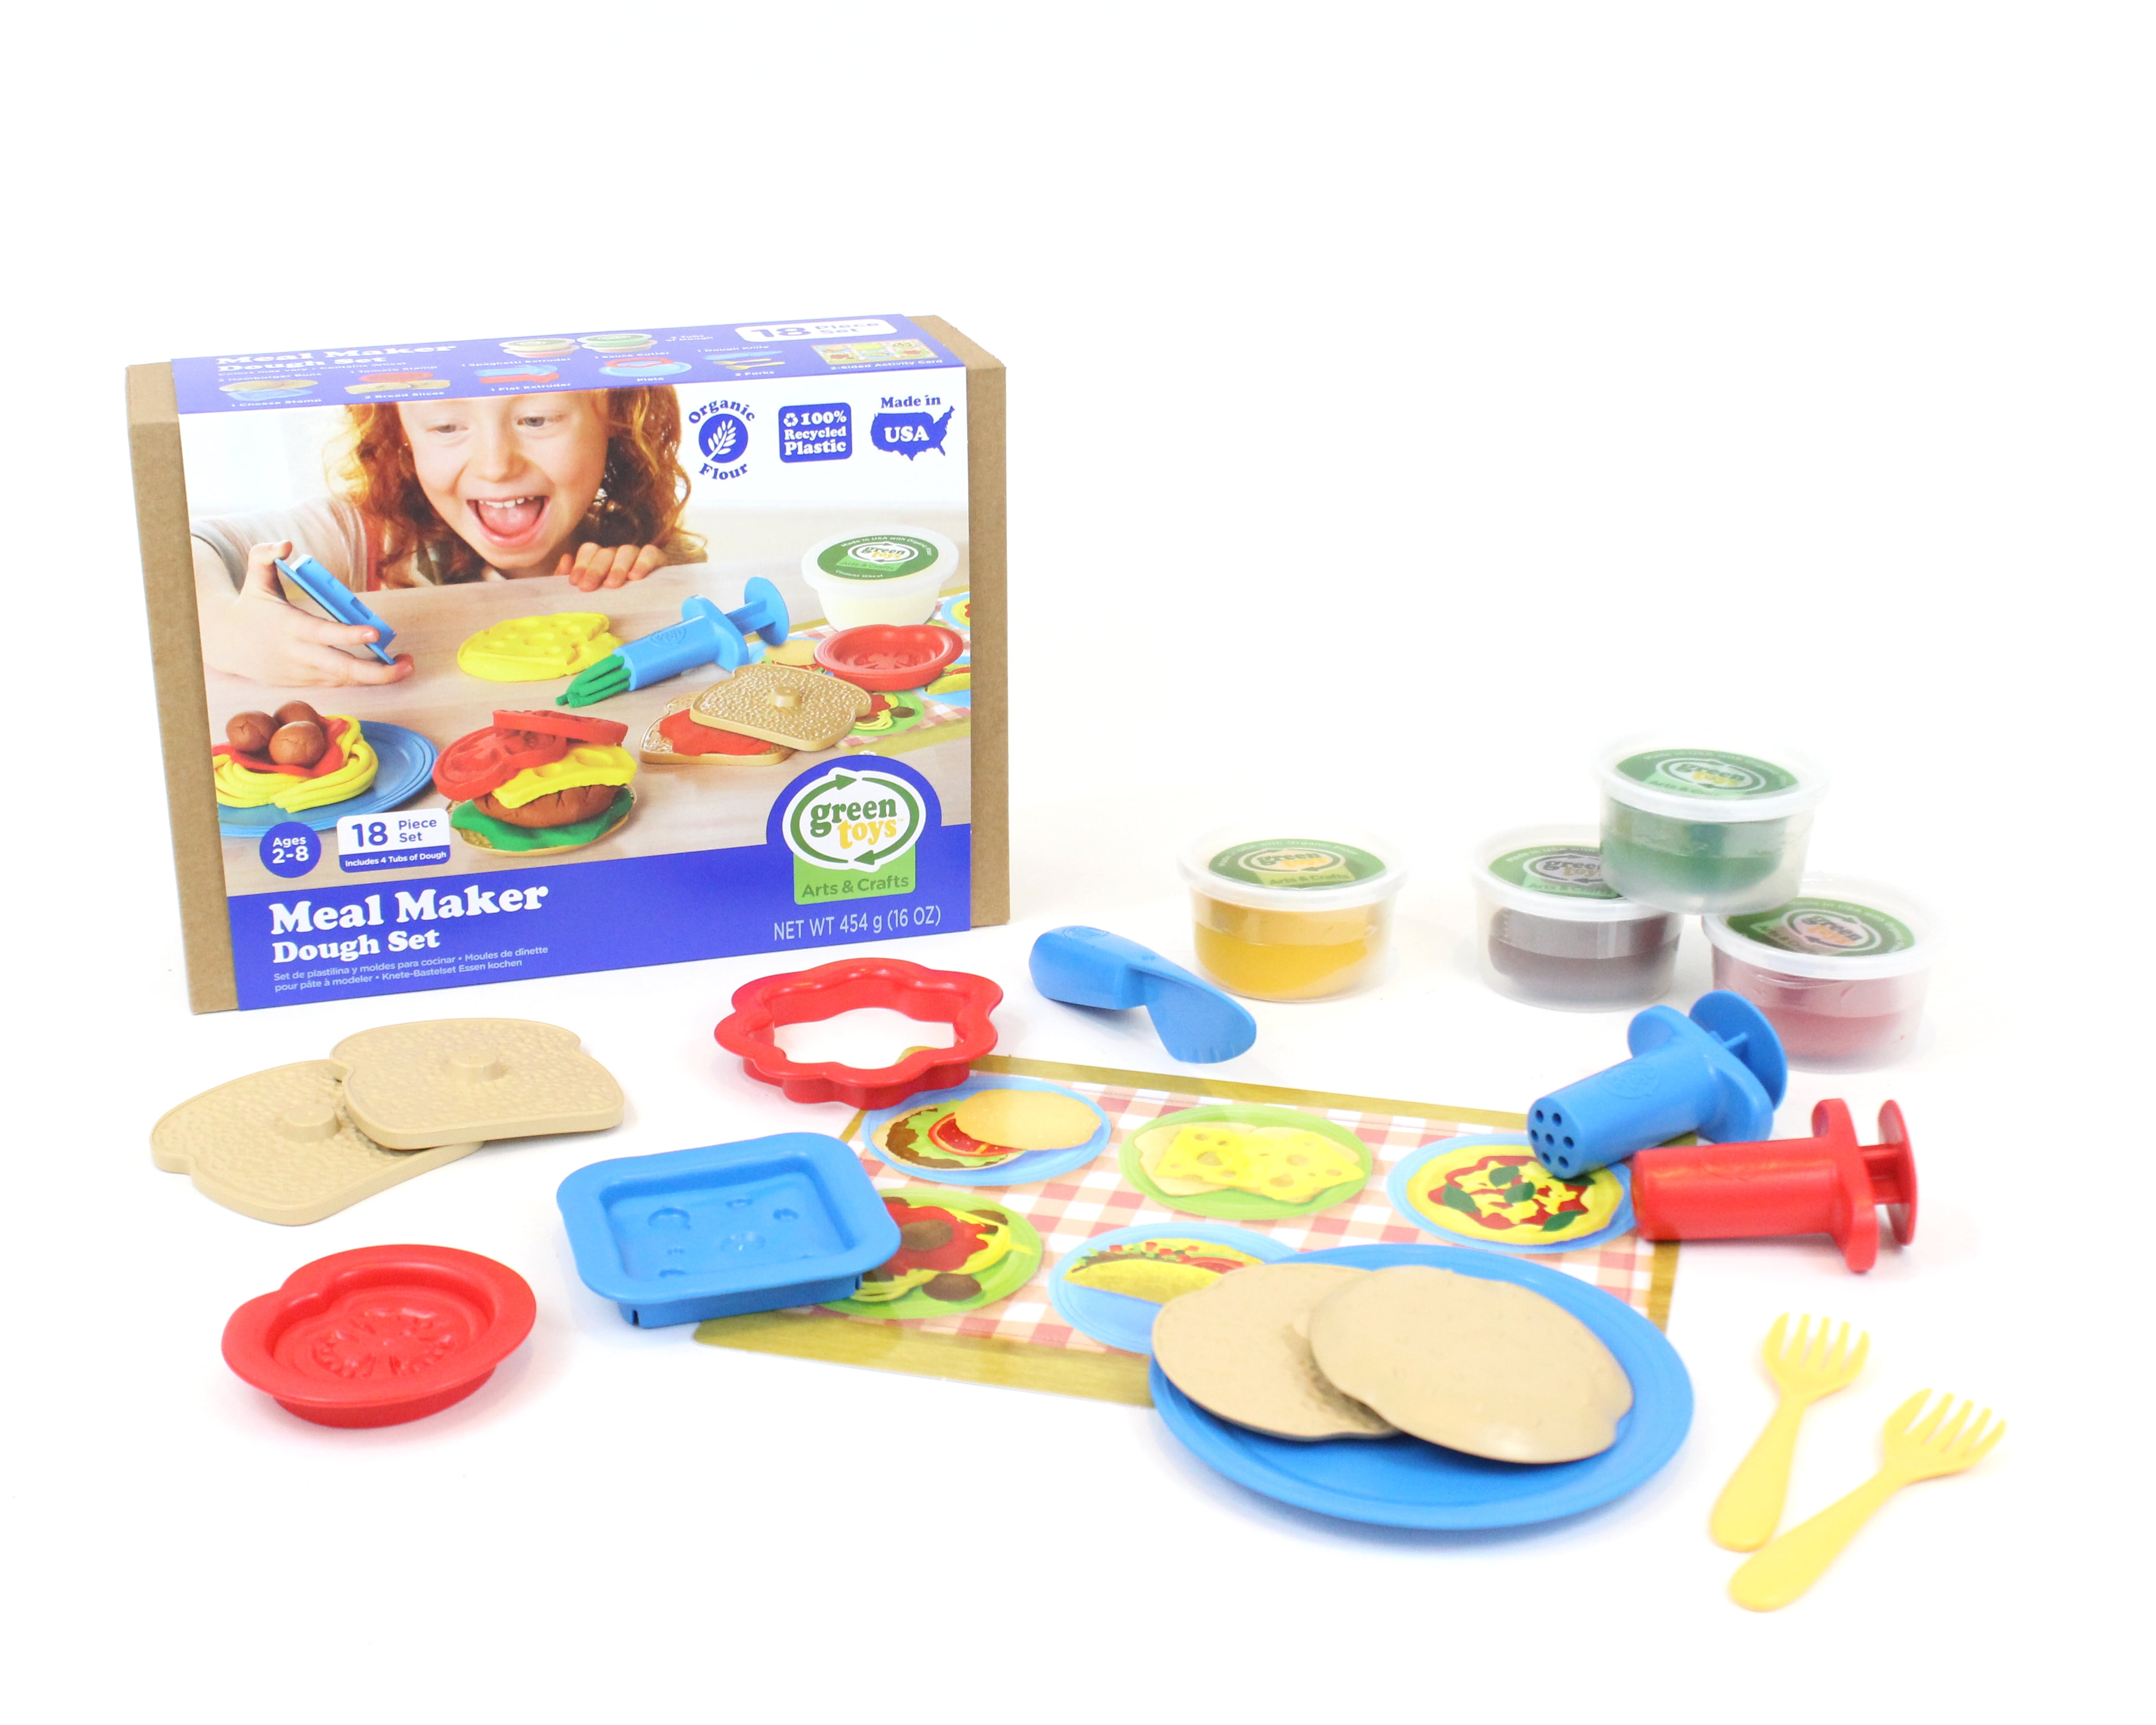 WOODMAM Wooden Pizza Toy - 48 PCS Montessori Pretend Play Food for Ages 3+,  Educational Learning Toy Wooden Playset with Bake Oven, Christmas Birthday